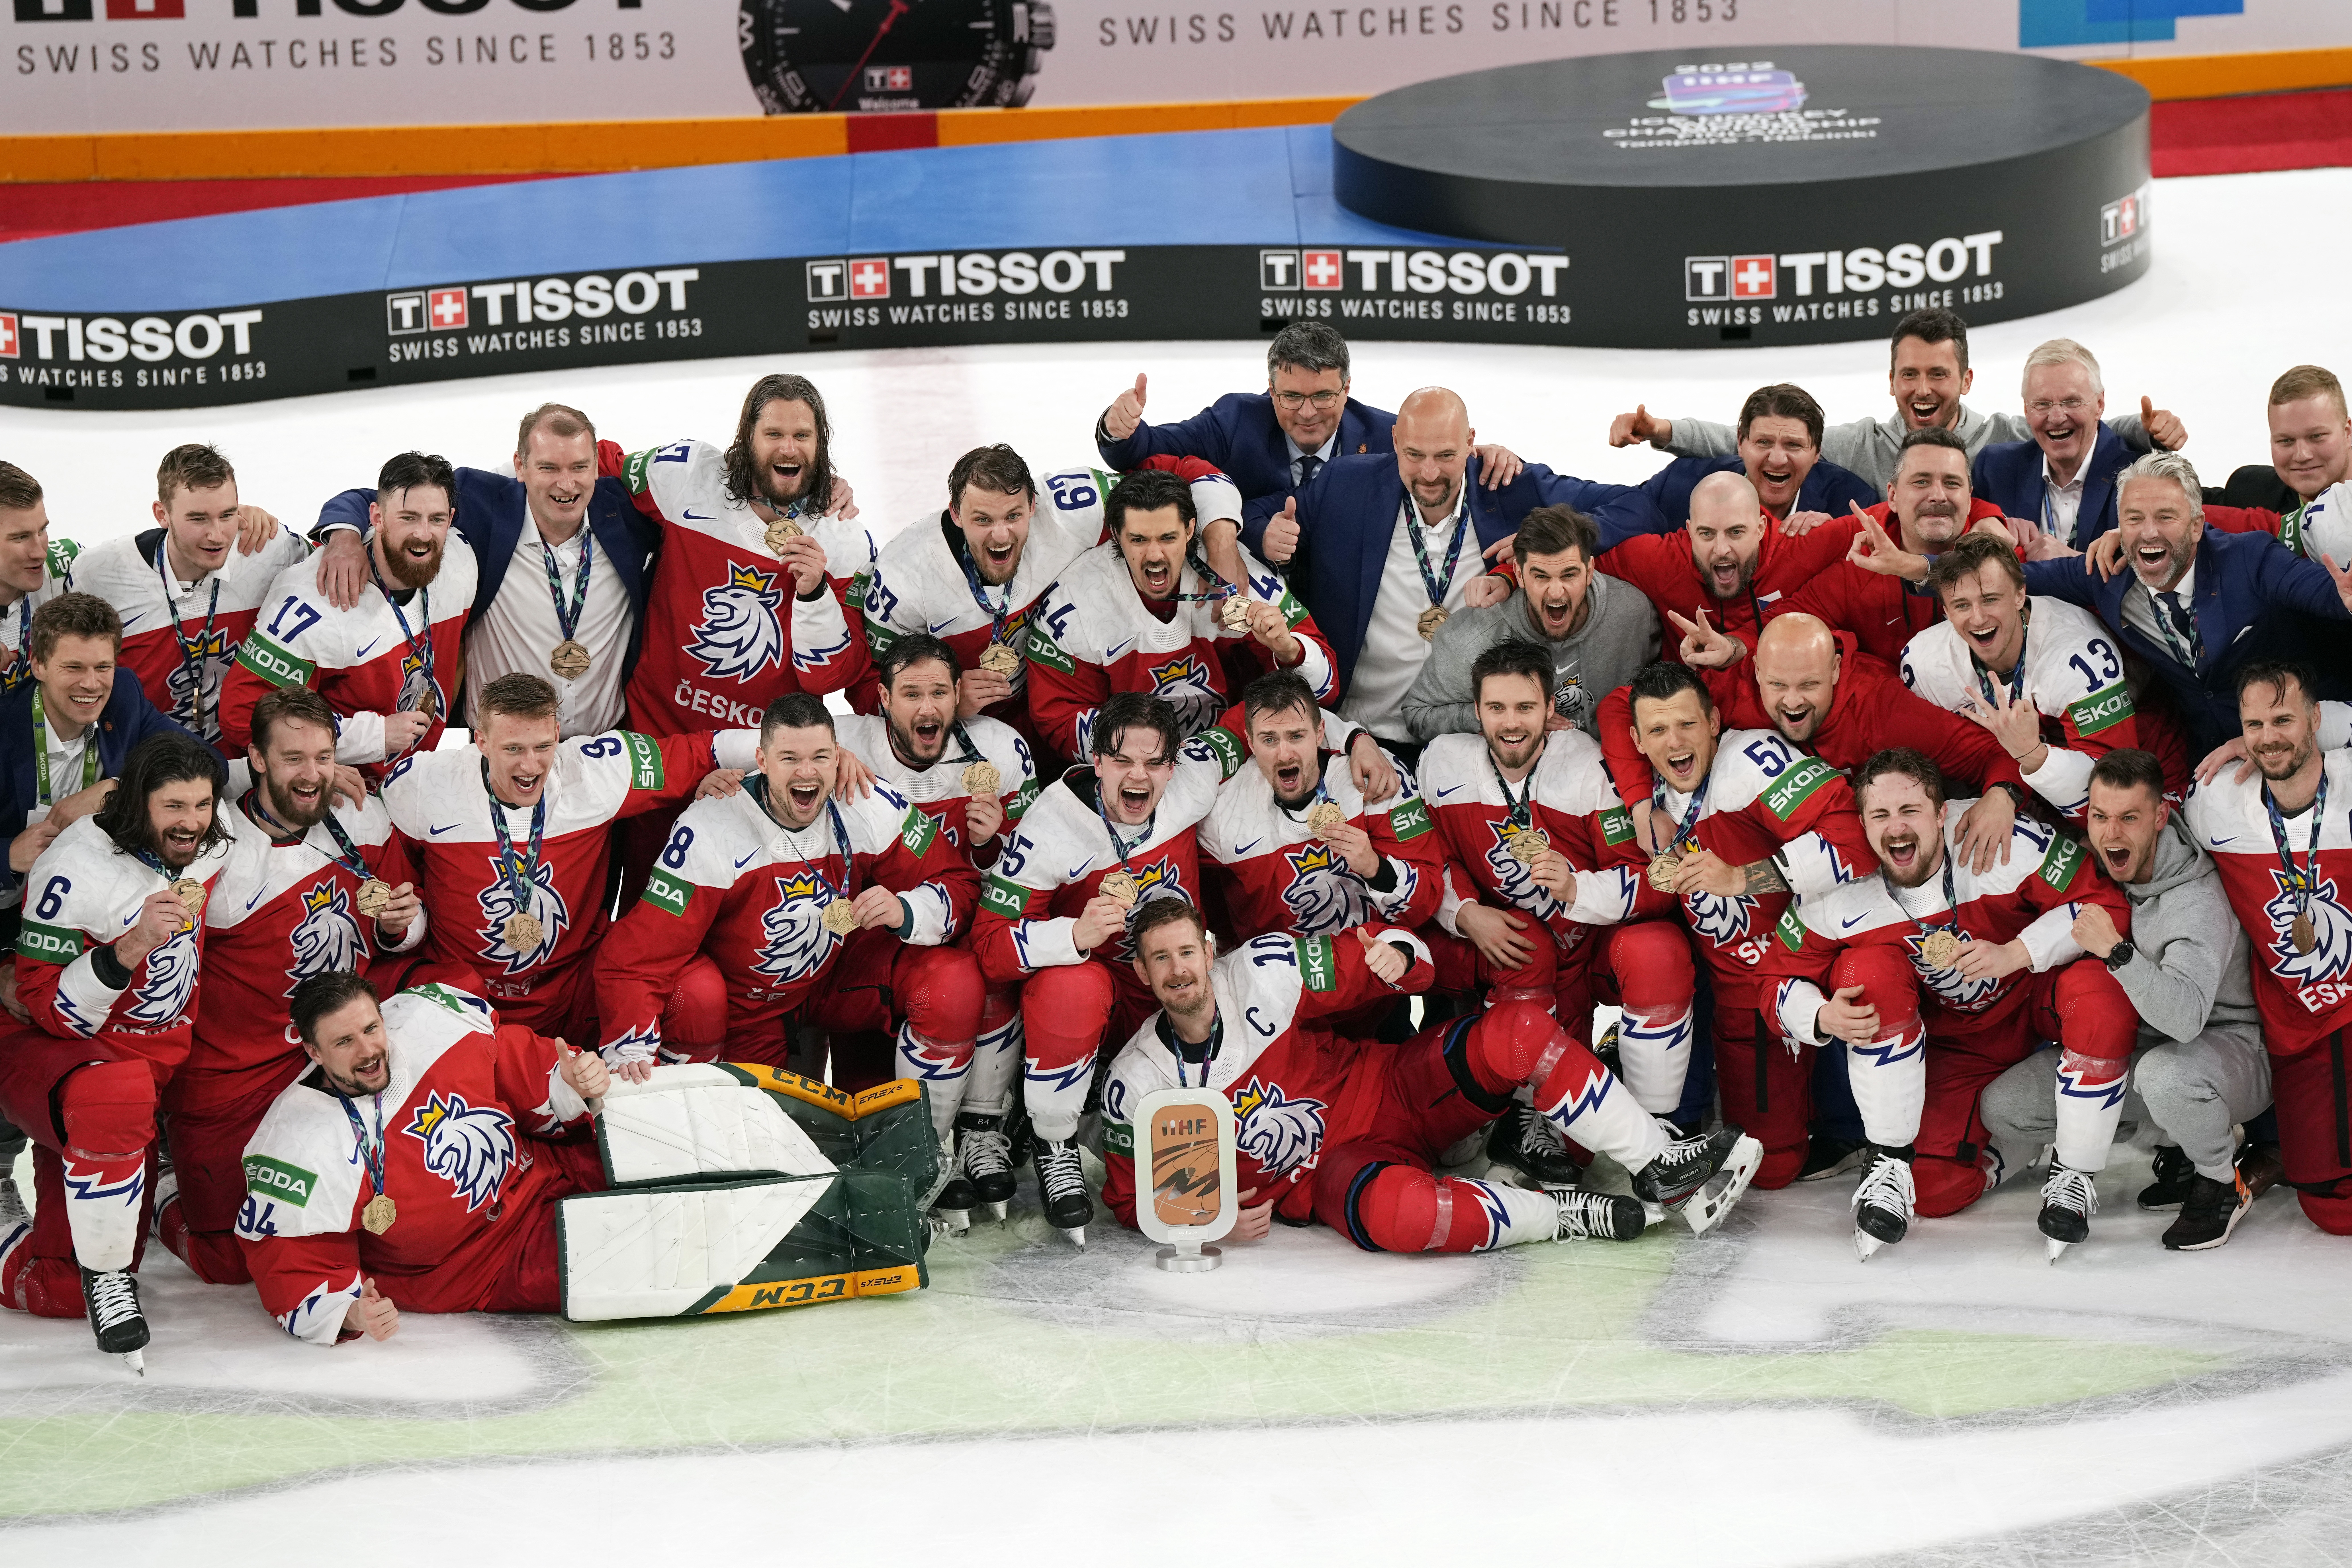 The Czech Republic team poses for a photo while holding the Bronze medal trophy after the Hockey World Championship bronze medal match between Czech Republic and USA in Tampere, Finland, on Sunday, May 29, 2022. The Czech Republic won 8-4